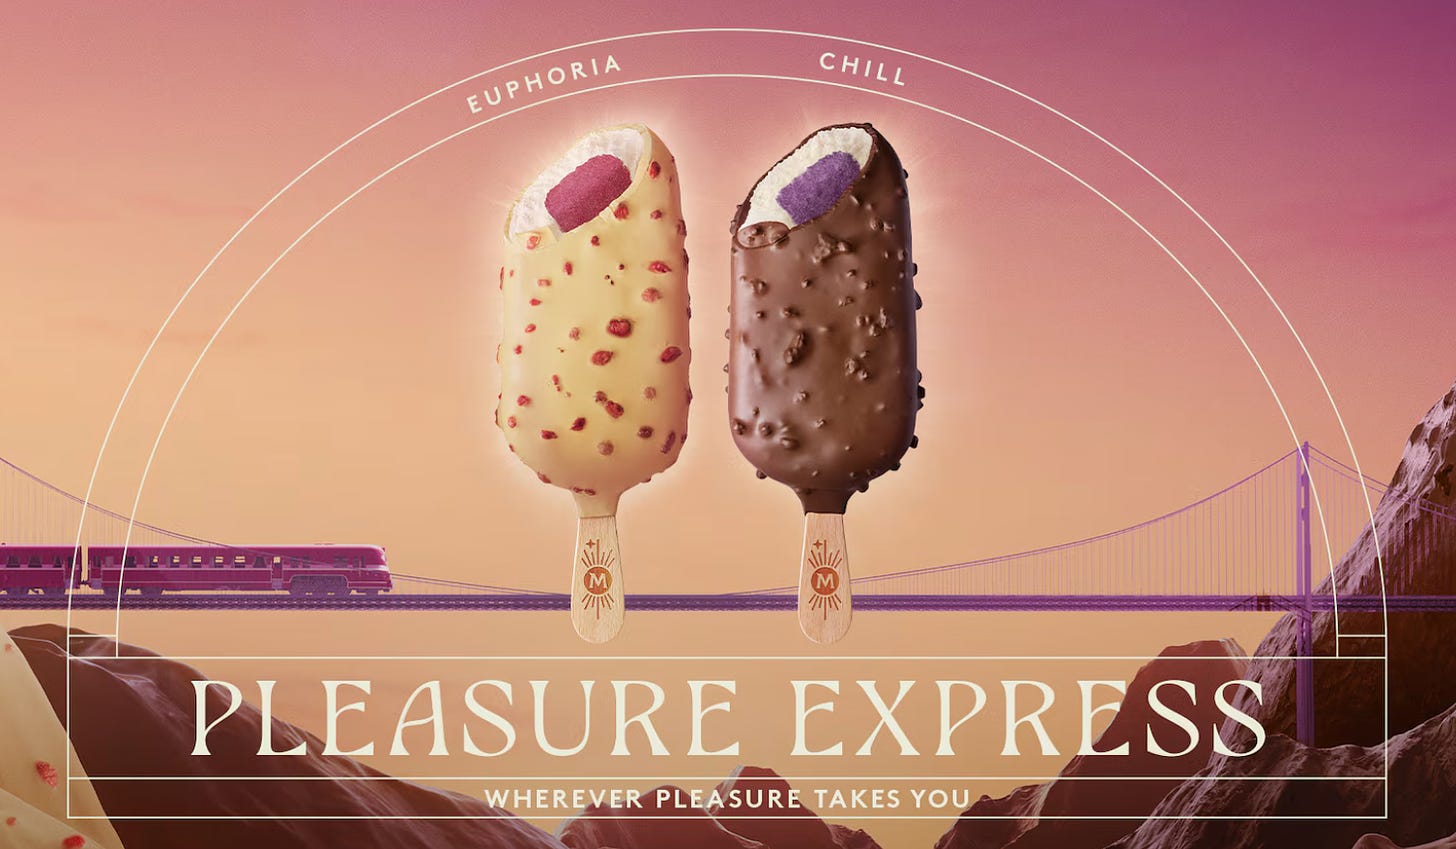 The Pleasure Express advertisement. It's a sunset background with a purple train traveling across a suspension bridge, and in front are the two chocolate bars. This time they're fully covered, with a bite taken out of each revealing the colorful center. But it's too late, you know? We've already seen what's in there.